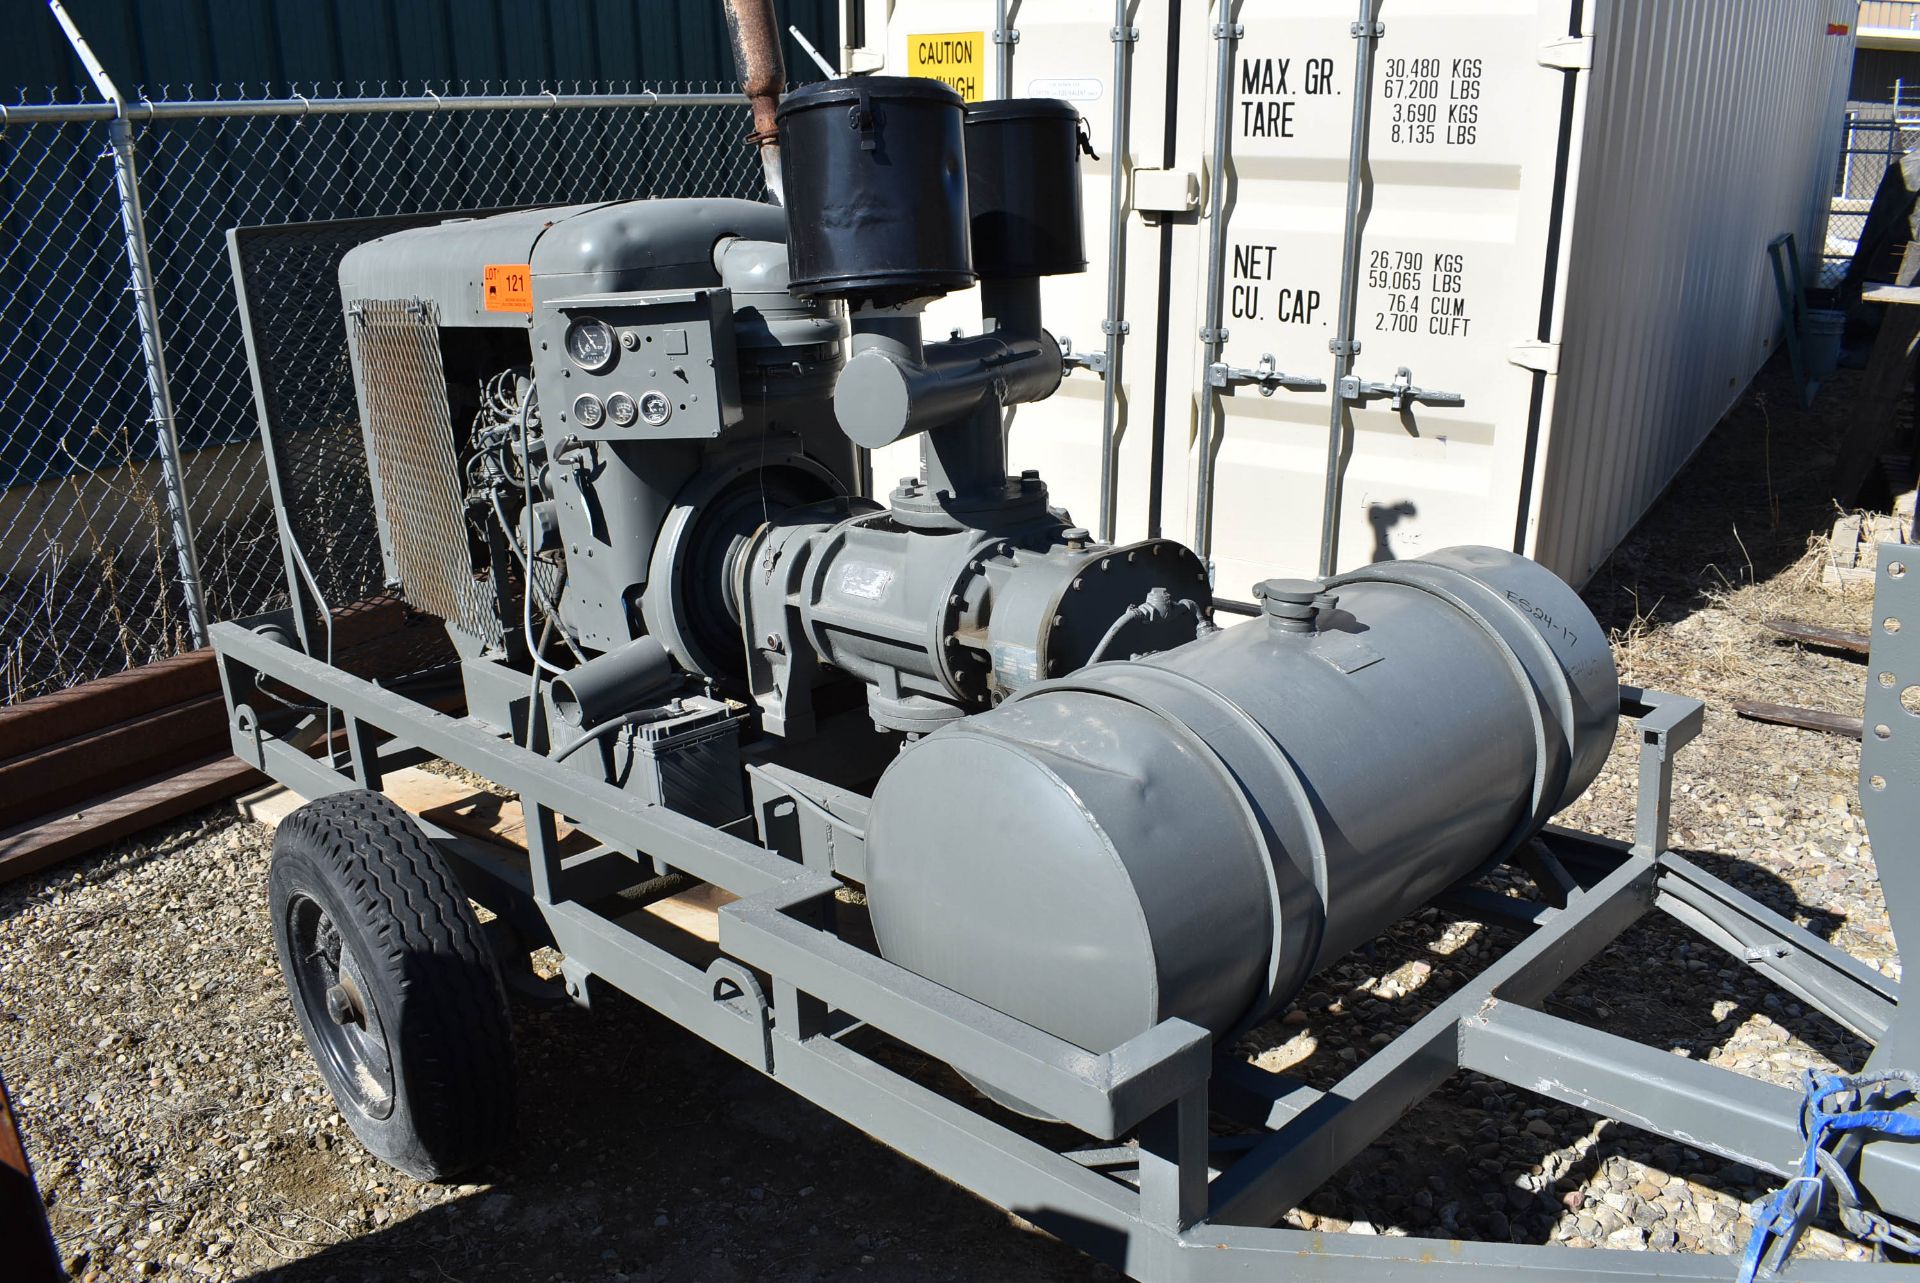 PORTABLE TOW-BEHIND GAS POWERED COMPRESSOR WITH FORD 6 CYLINDER ENGINE, CYCLOBLOWER 2800 RPM - Image 3 of 6